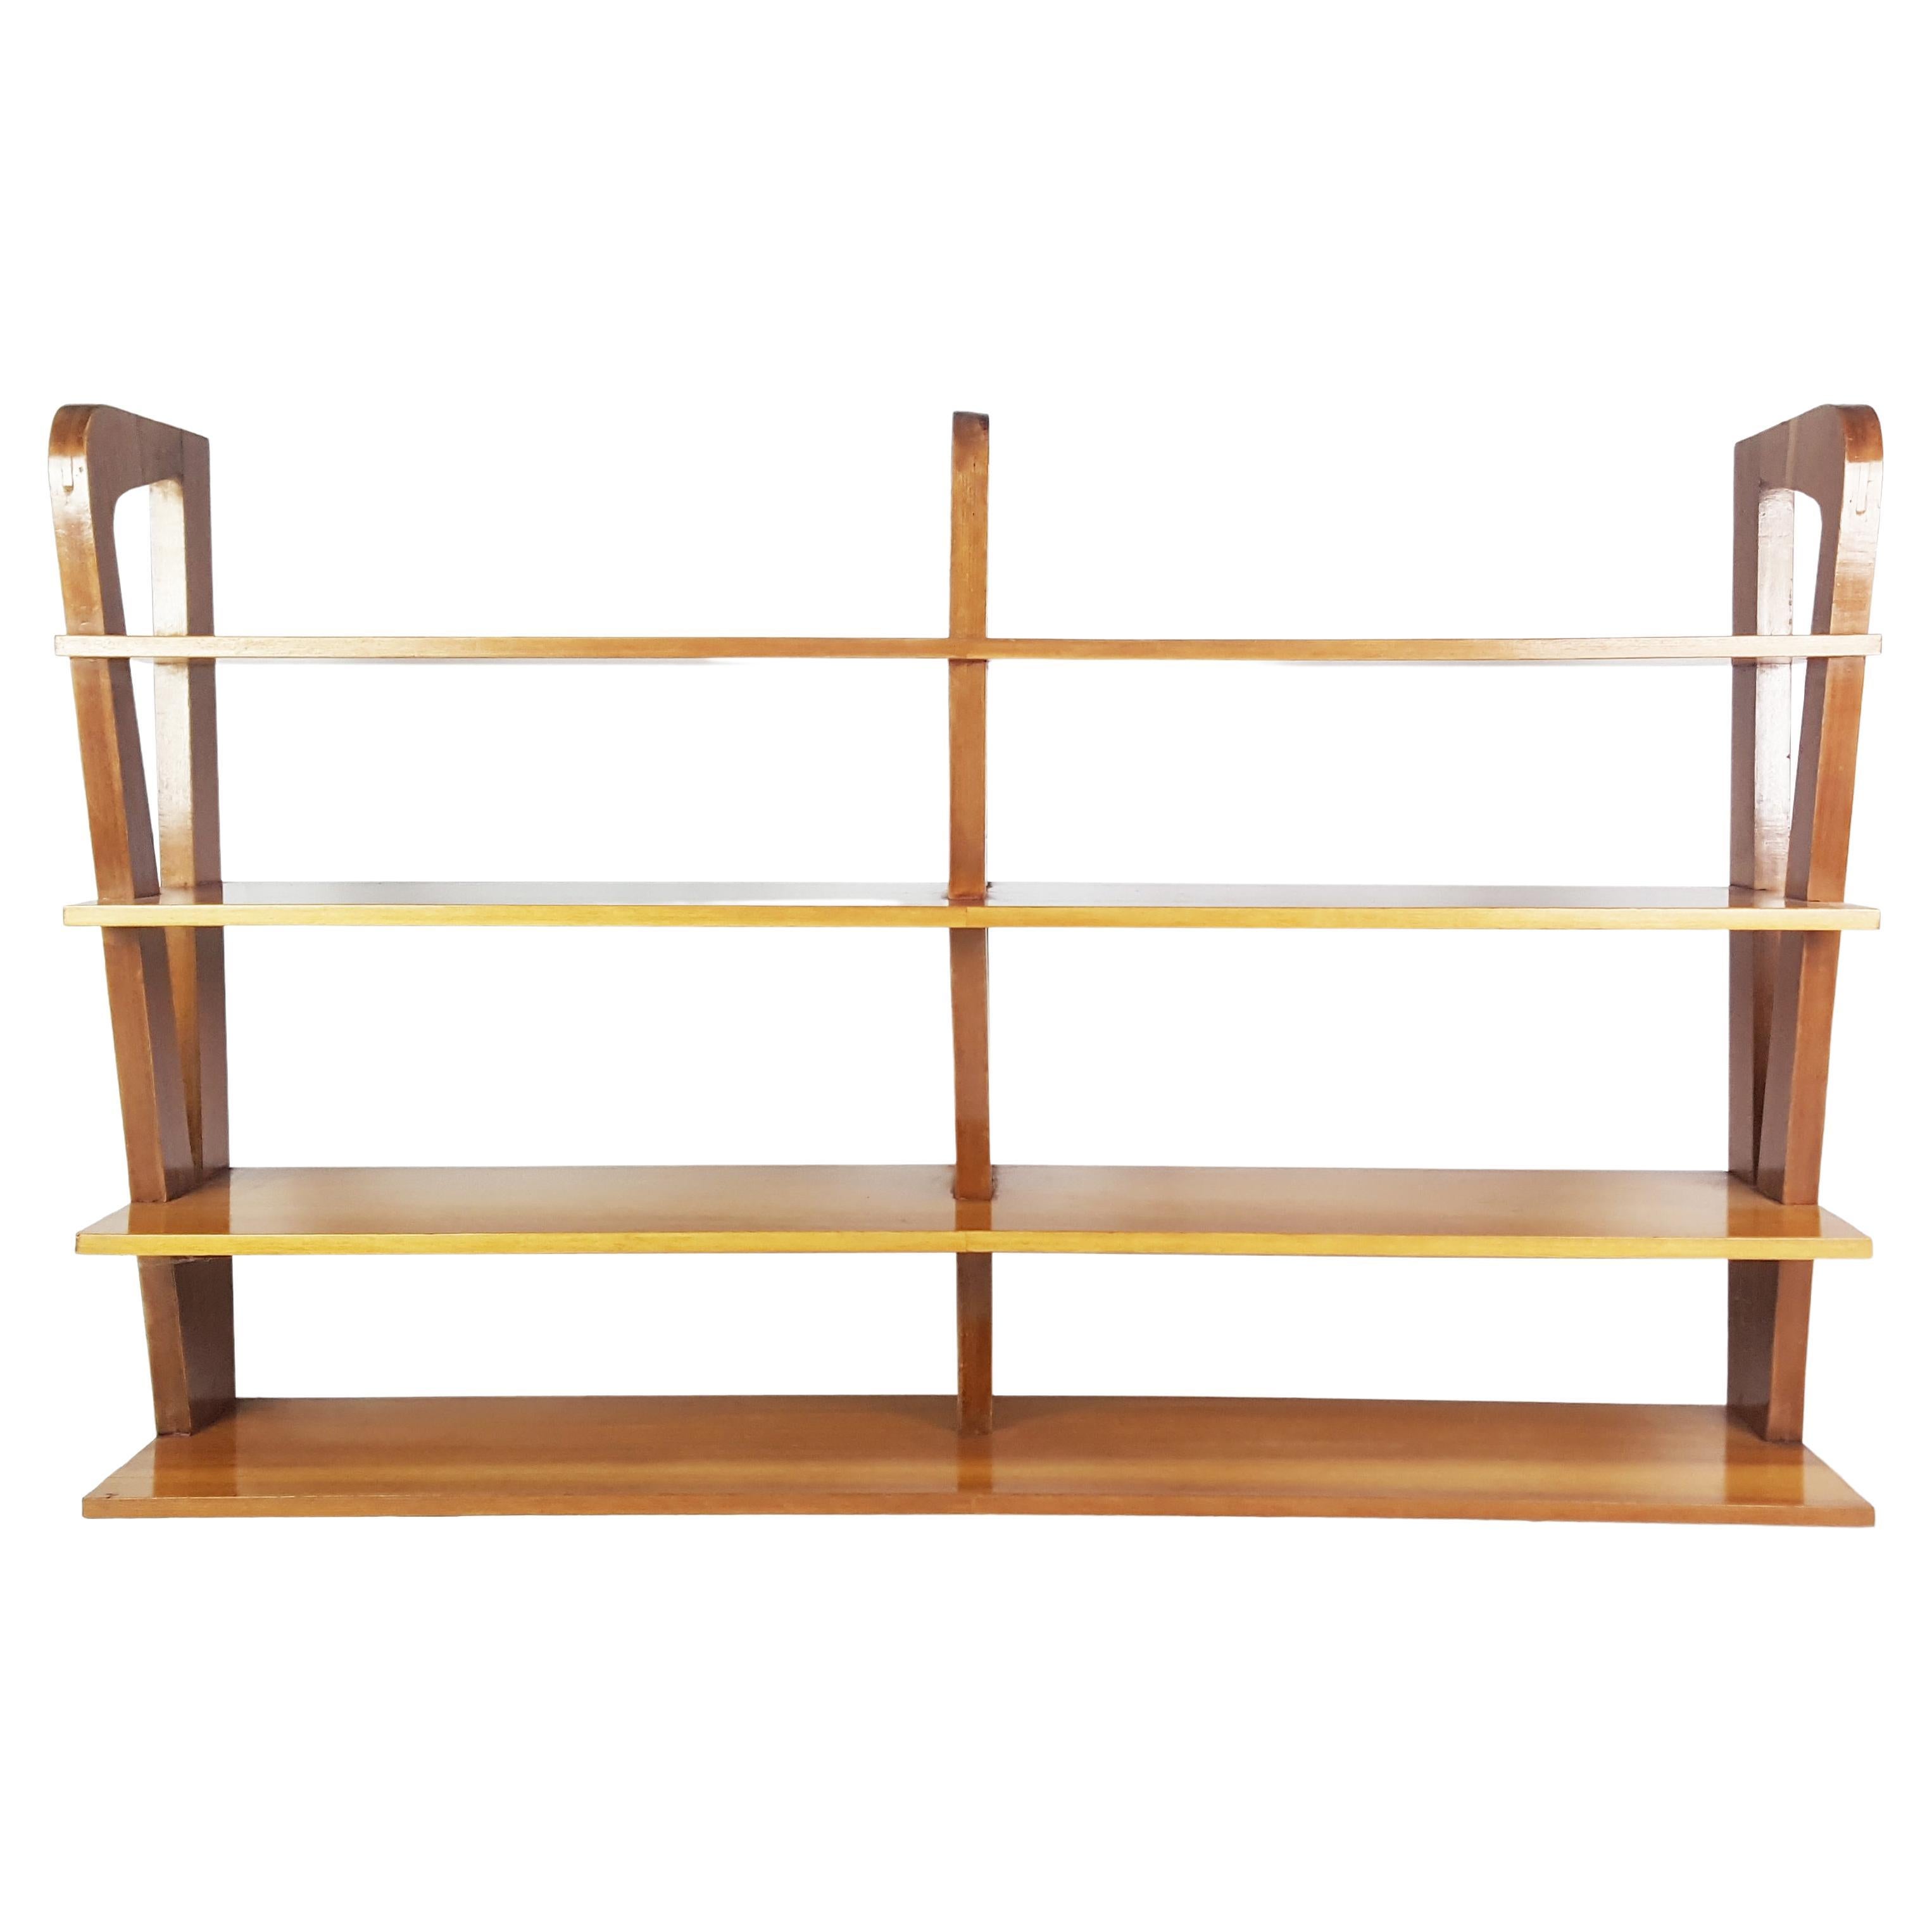 This hanging shelf was produced in Italy around the 1950s. It is made from teakwood and remains in overall good condition.
Shelf is part of a 1950s furniture made in part with furniture produced by ISA. As you can see from the last photo, the set